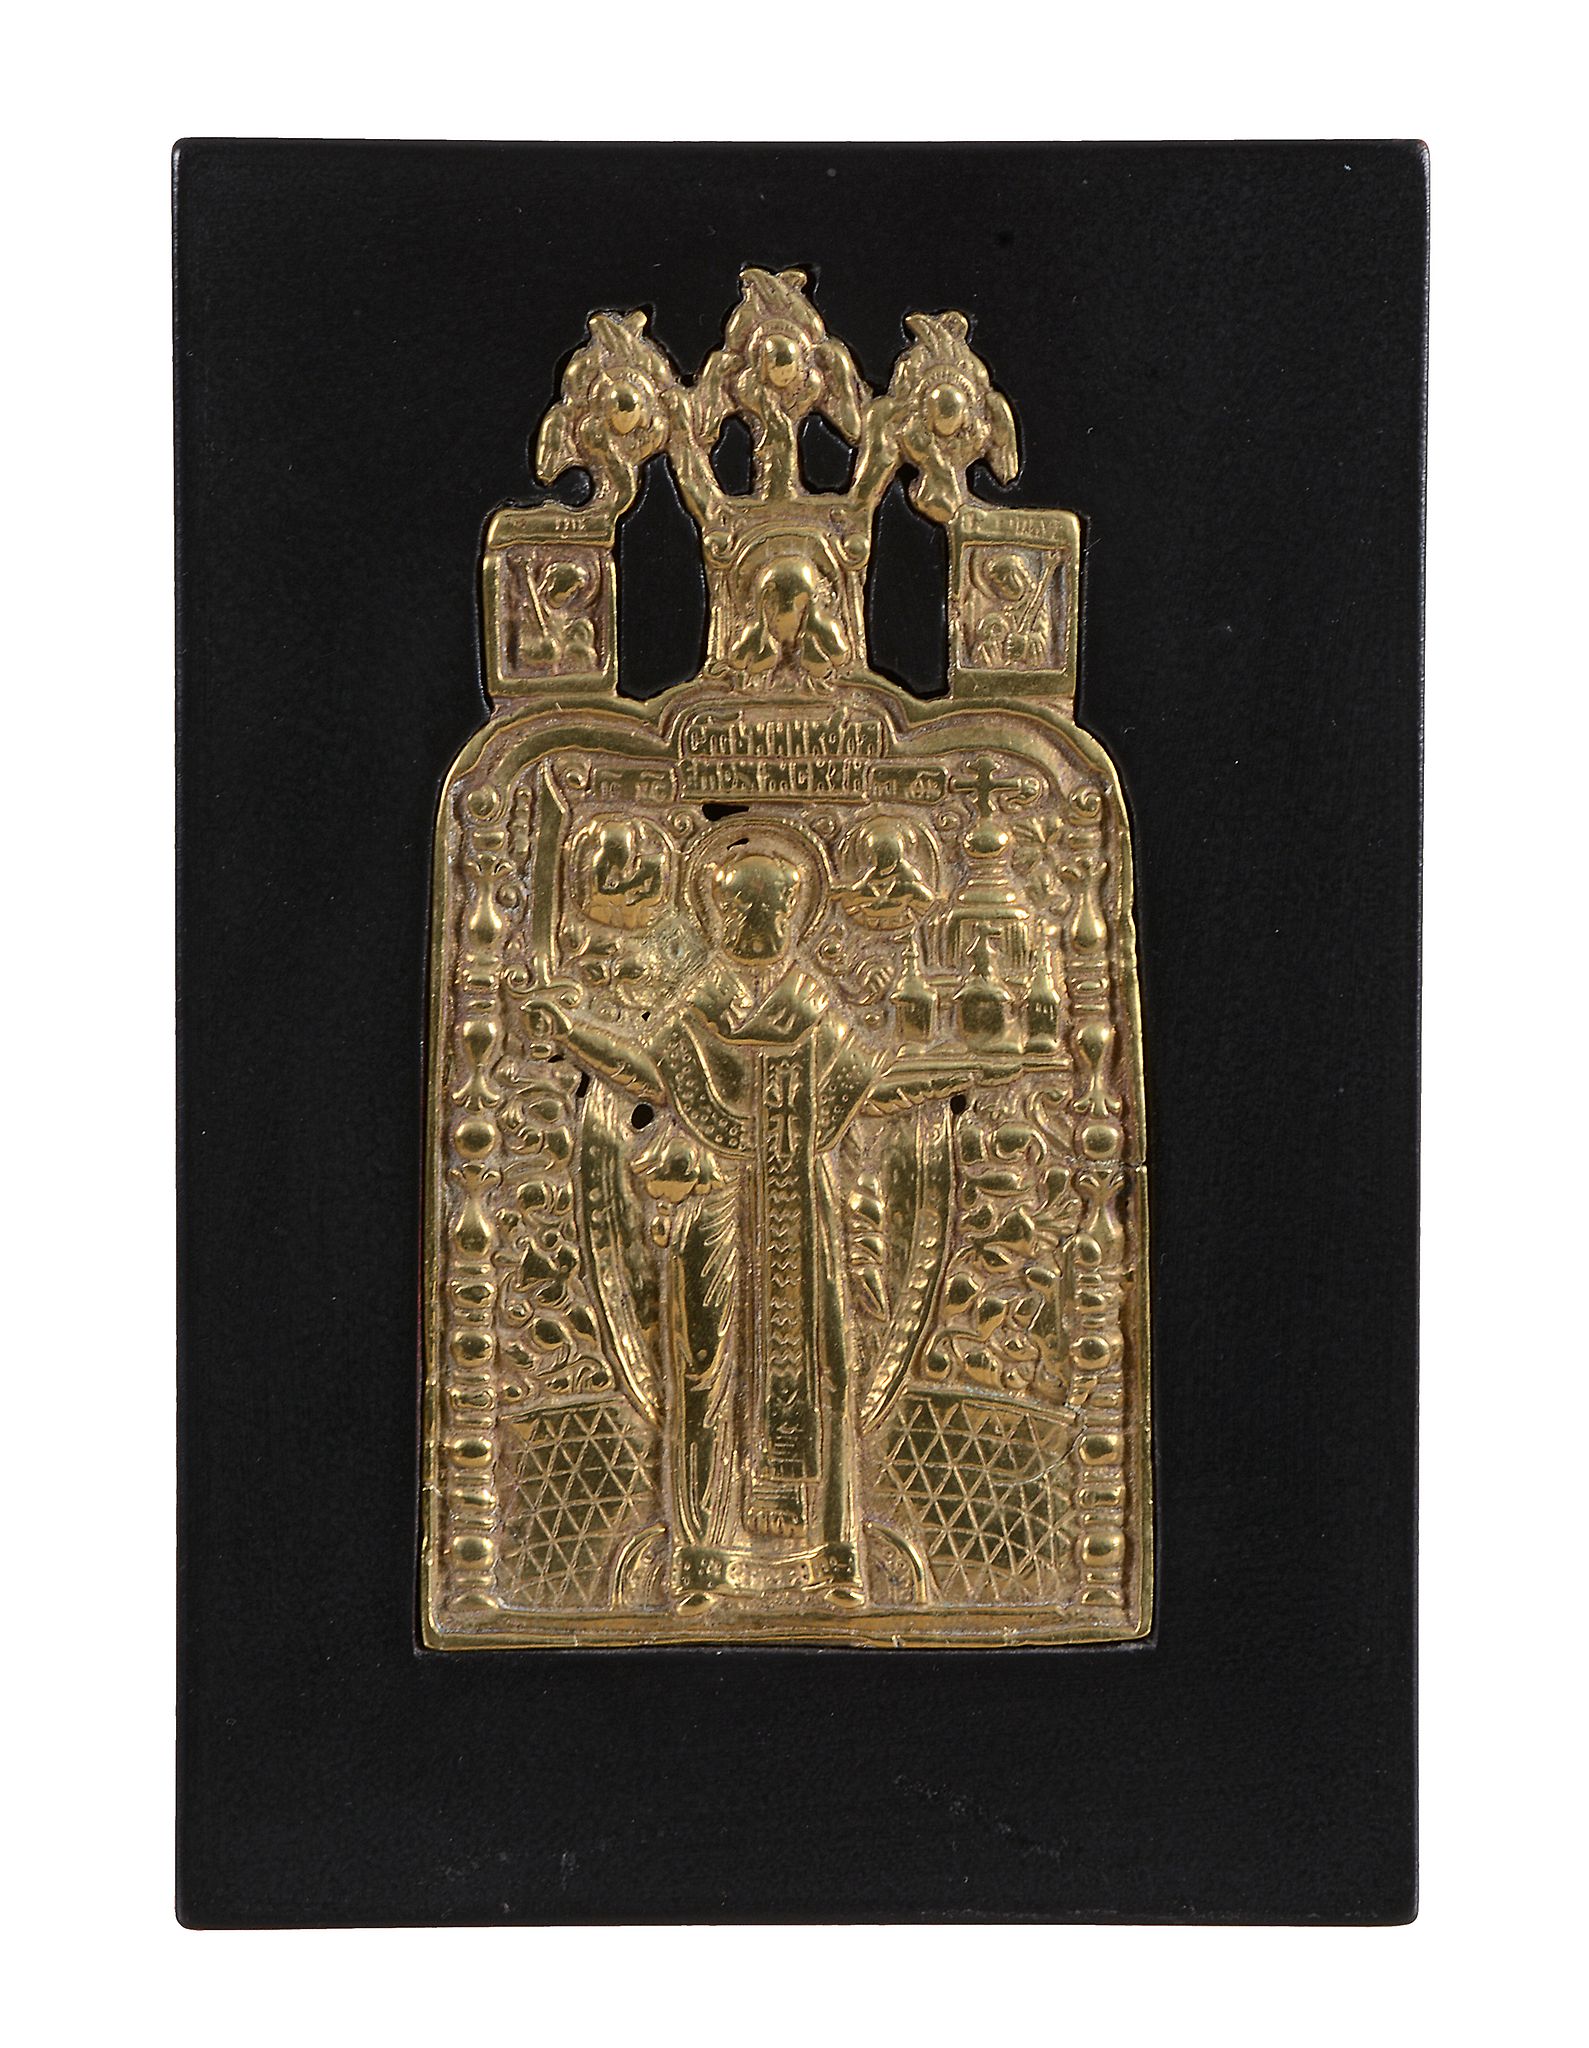 A Russian relief cast brass icon, Saint Nicholas, late 18th century   A Russian relief cast brass